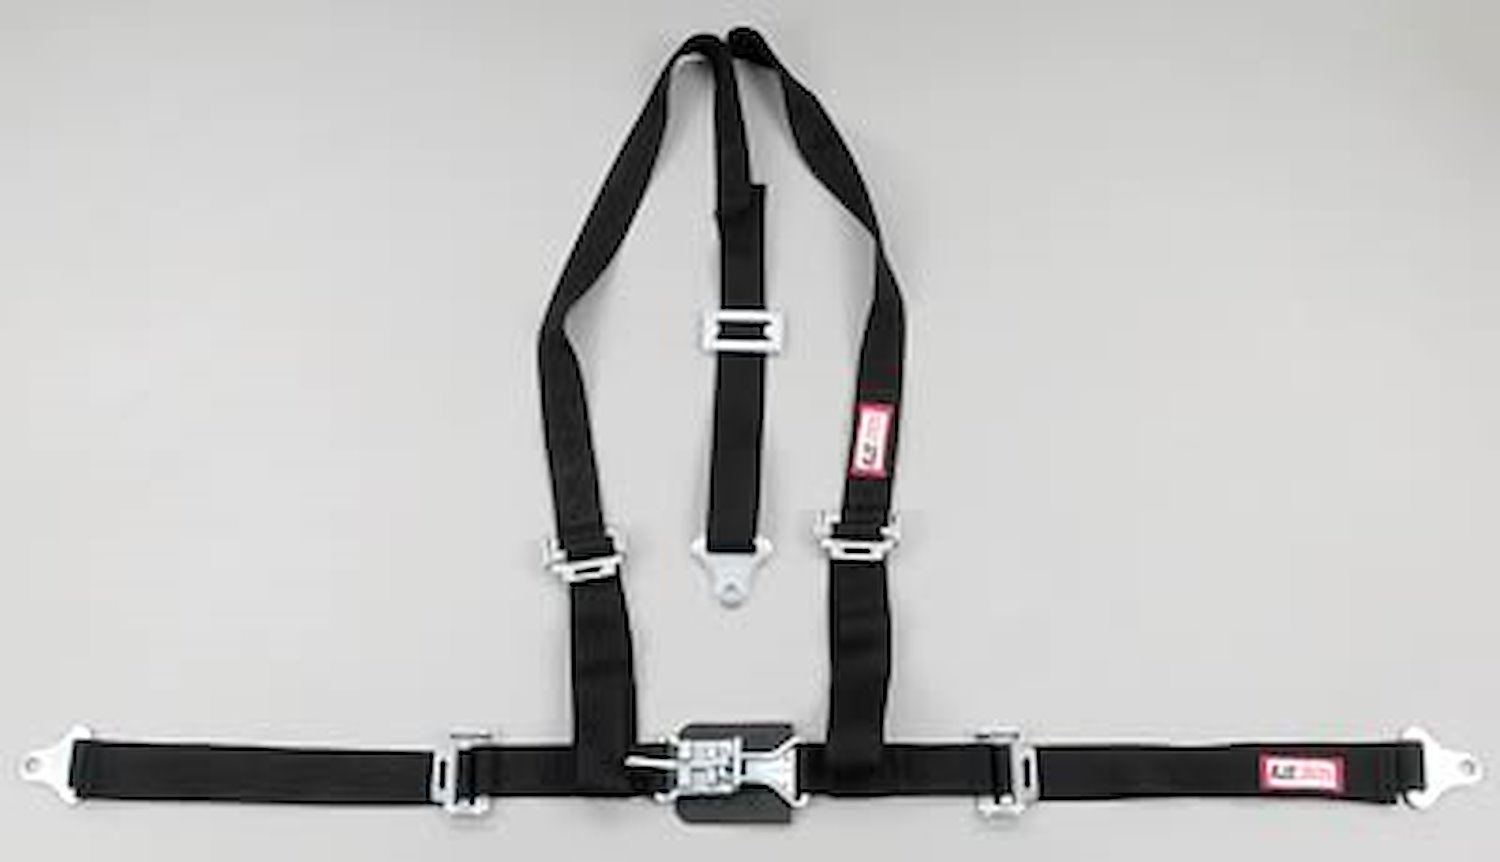 NON-SFI L&L HARNESS 3 PULL UP Lap Belt SEWN IN 2 Shoulder Harness V ROLL BAR Mount ALL SNAP ENDS RED